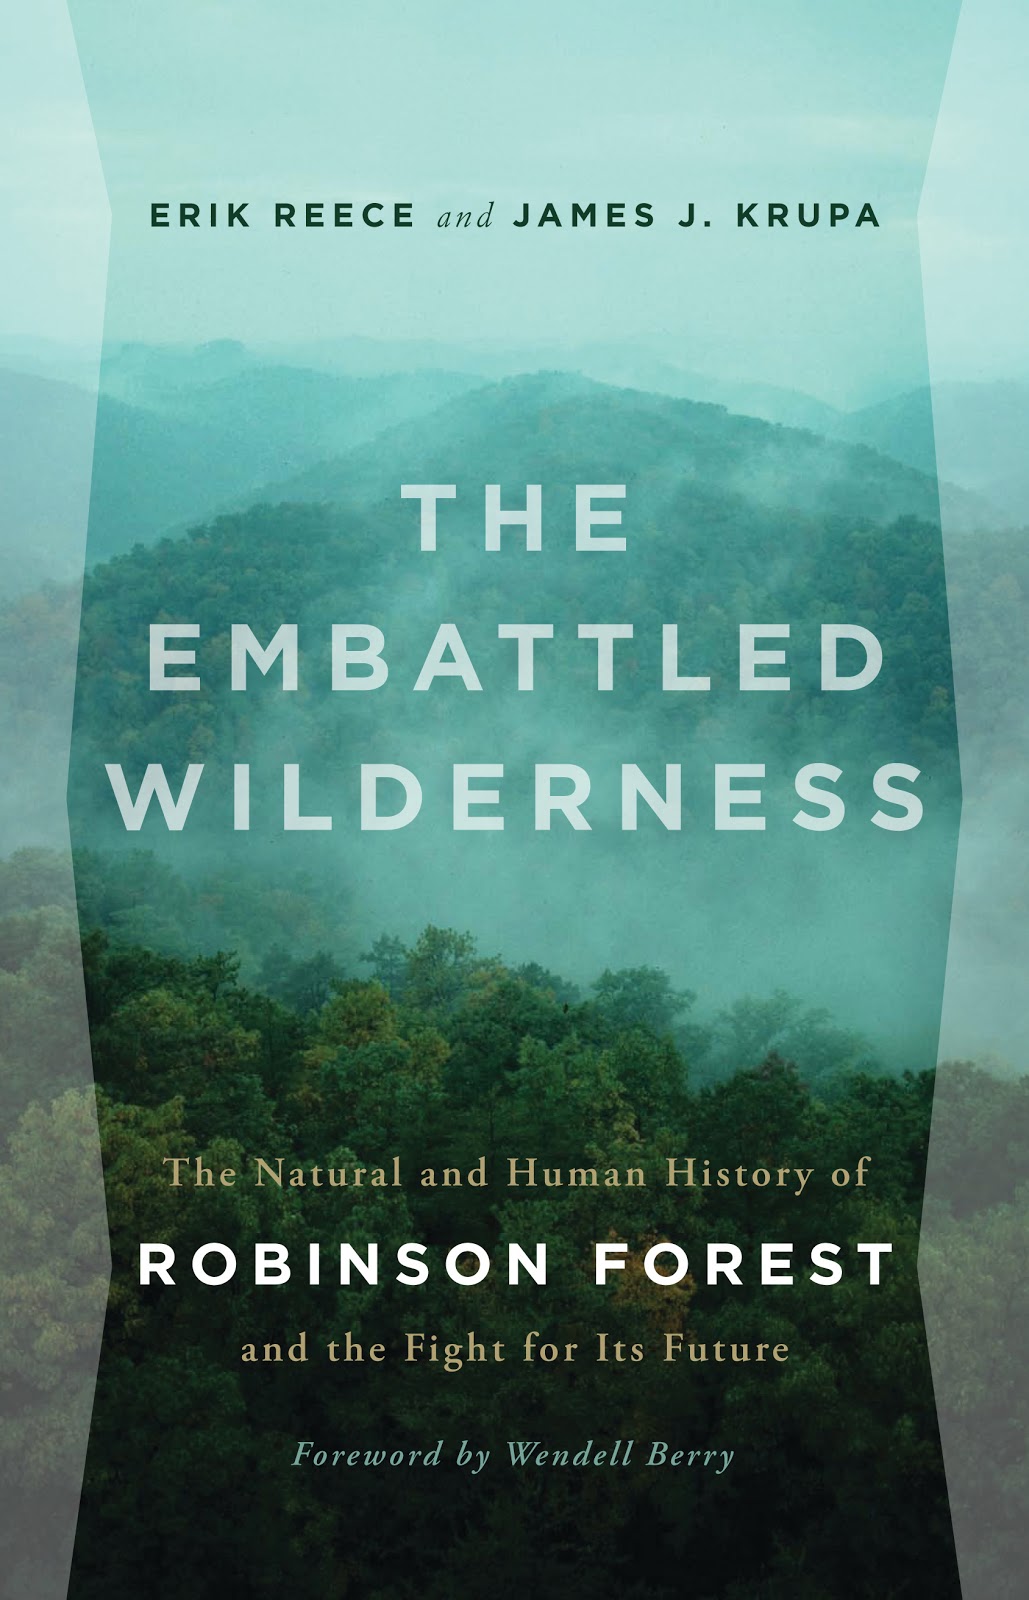 "The Embattled Wilderness" Book Cover